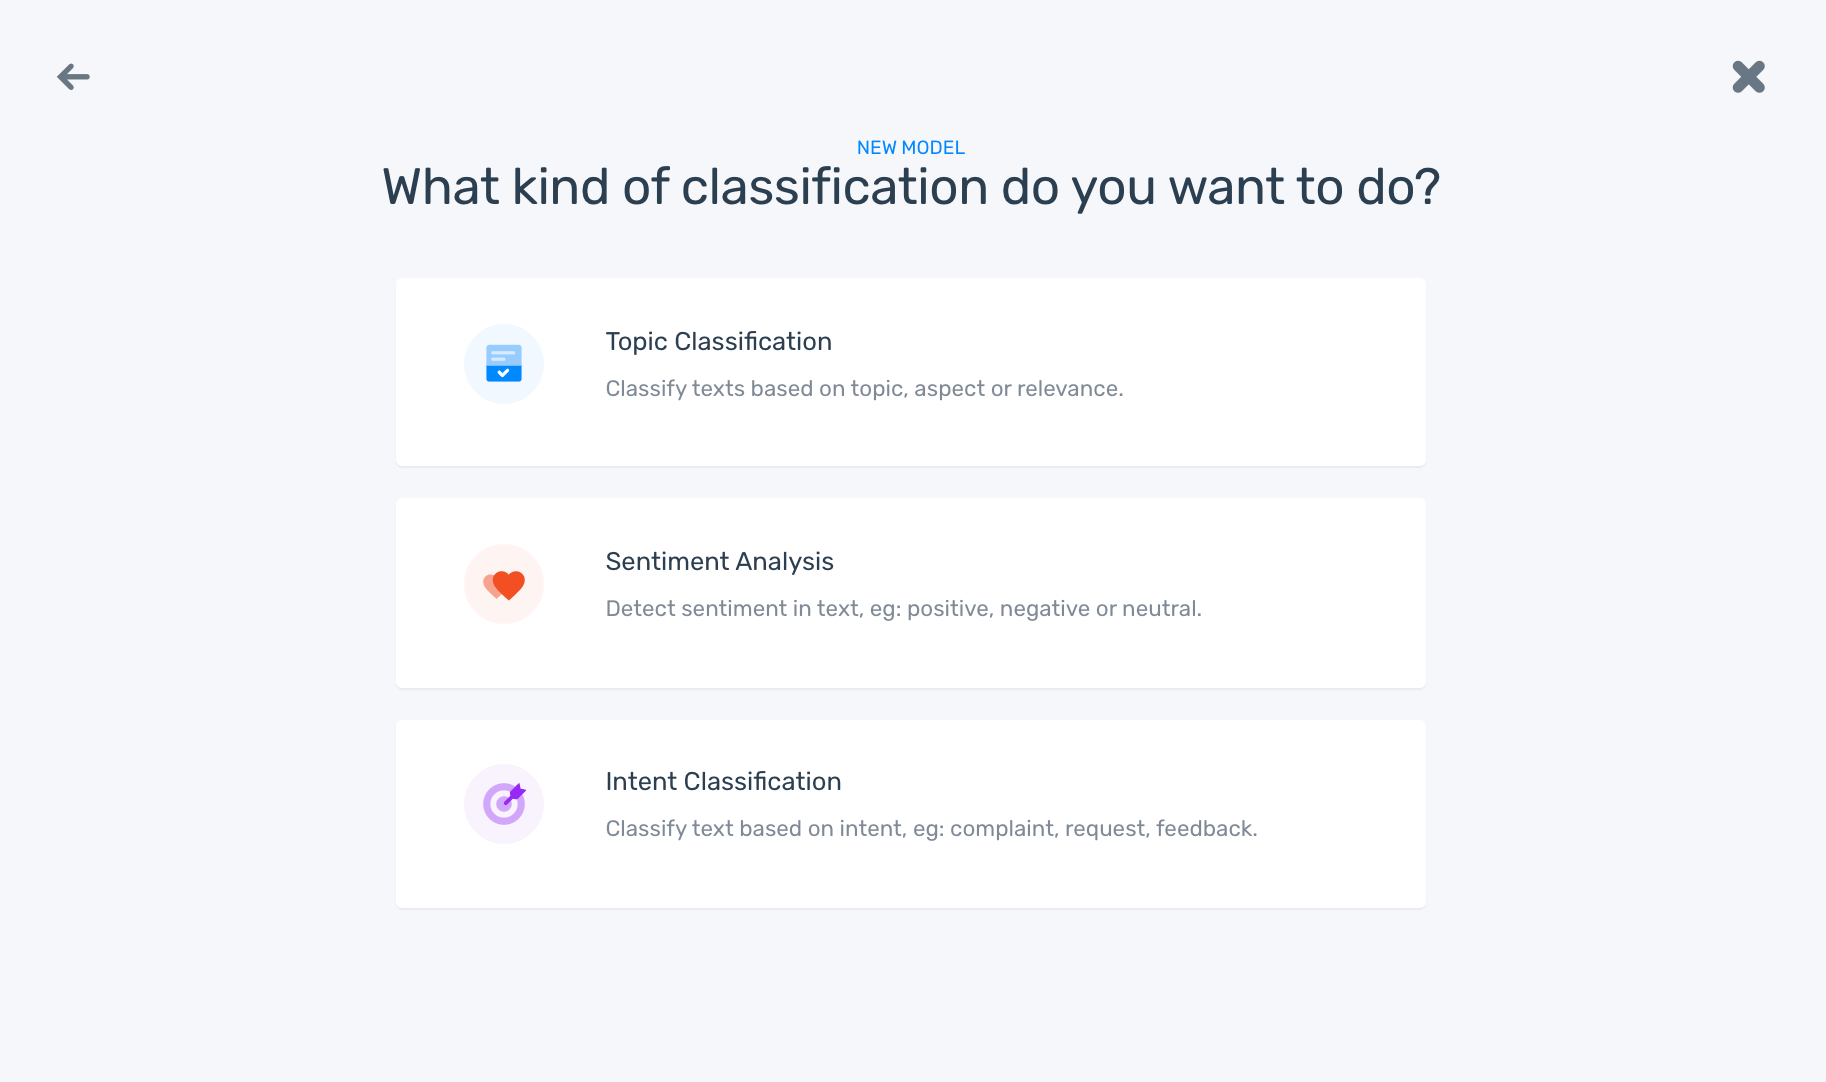 The option to choose Topic Classification, Sentiment Analysis, or Intent Classification. Click Sentiment Analysis to build your sentiment analyzer for this Python sentiment analysis tutorial.